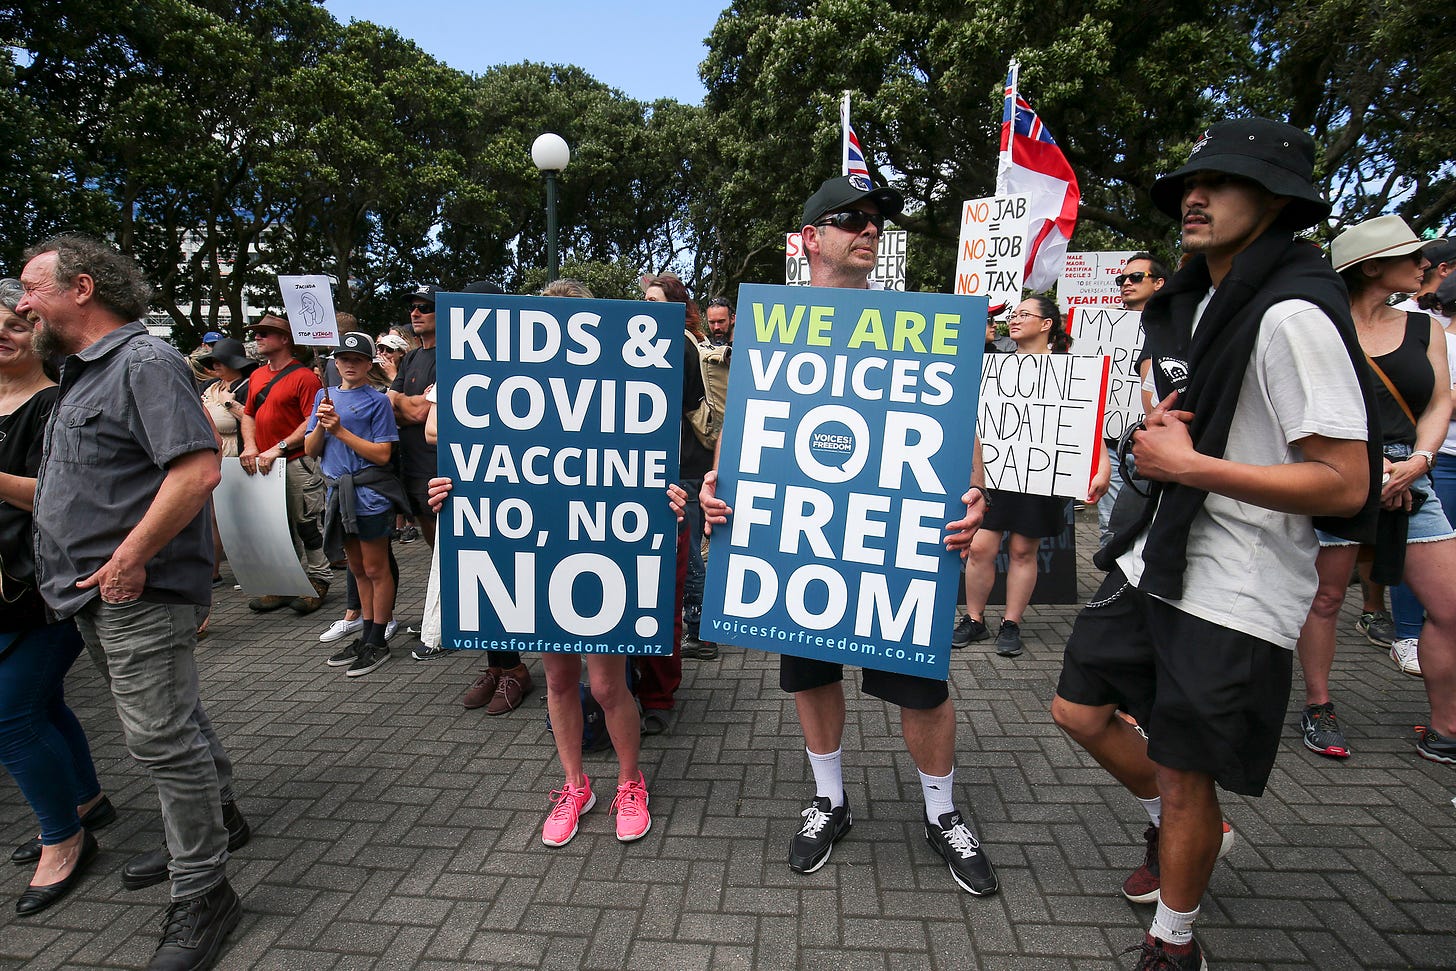 American vaccine misinformation and extremism are infiltrating New Zealand